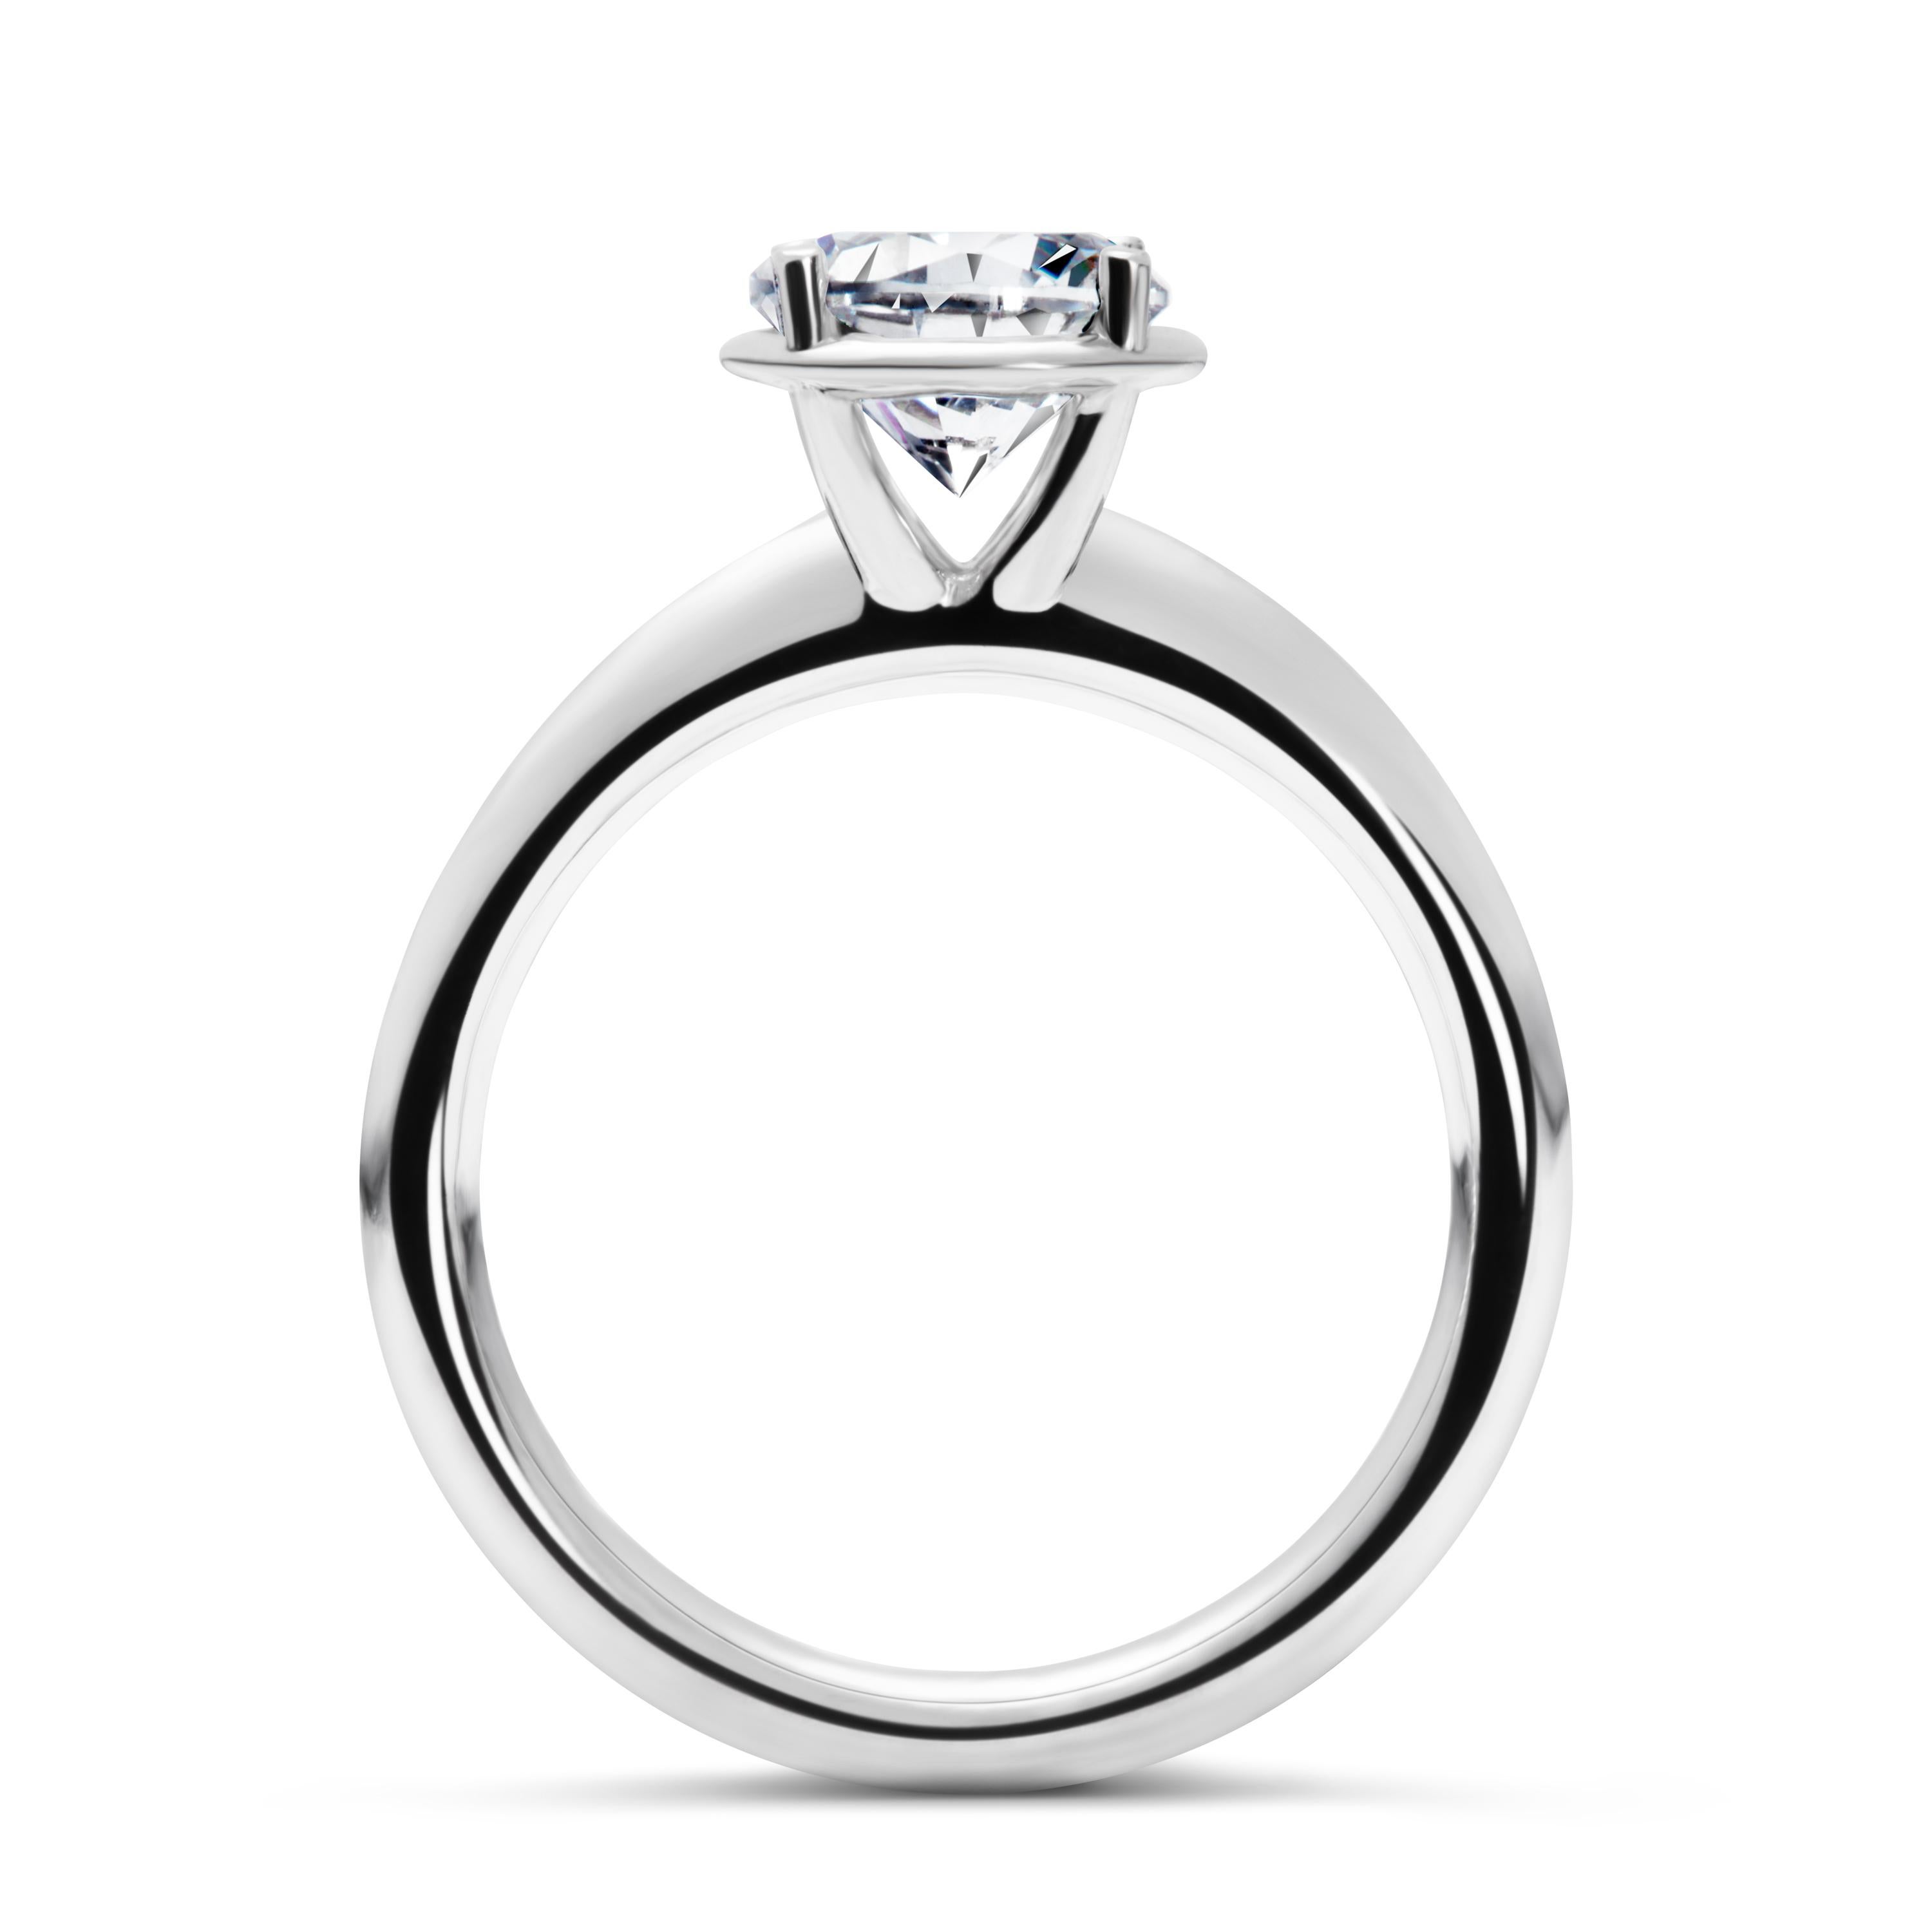 The No.1 Solitaire ring is designed to maximise the brilliance and luminosity of the diamond. Our distinctive halo is carefully engineered to elevate the diamond, emphasizing its size while strengthening and protecting the stone’s integrity. The